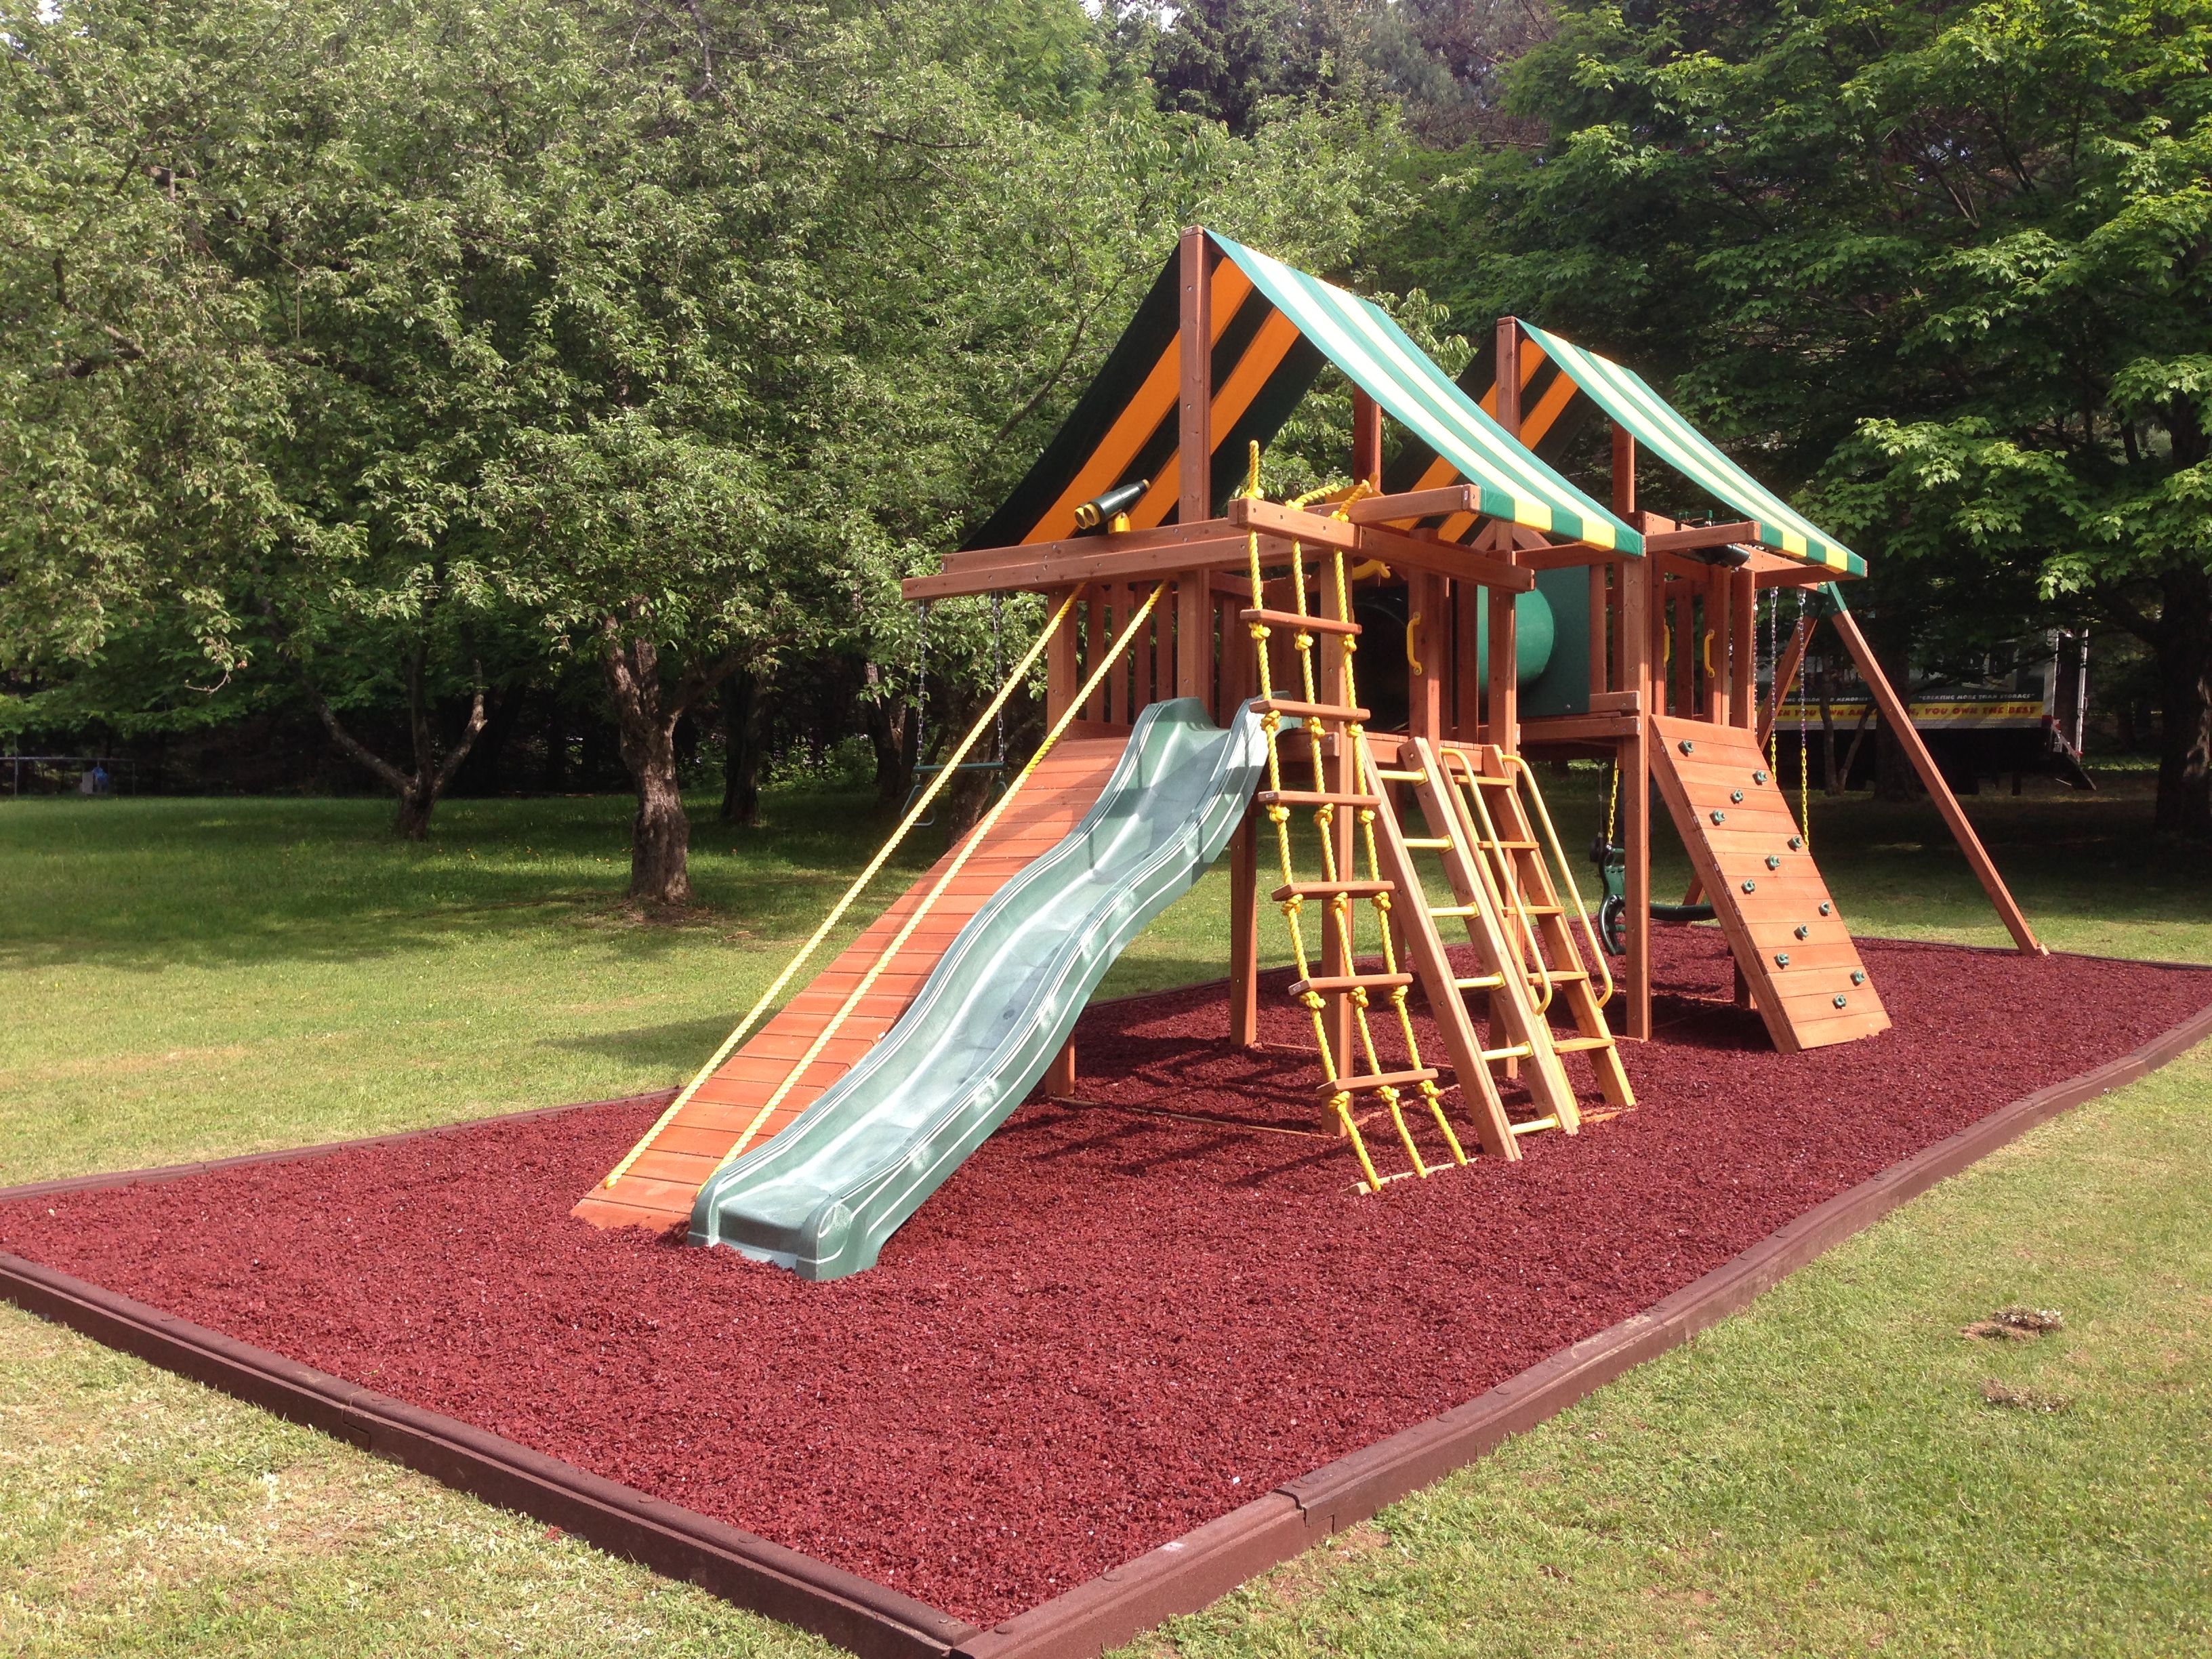 Custom swing set with red rubber mulch. | Playgrounds | Pinterest ...